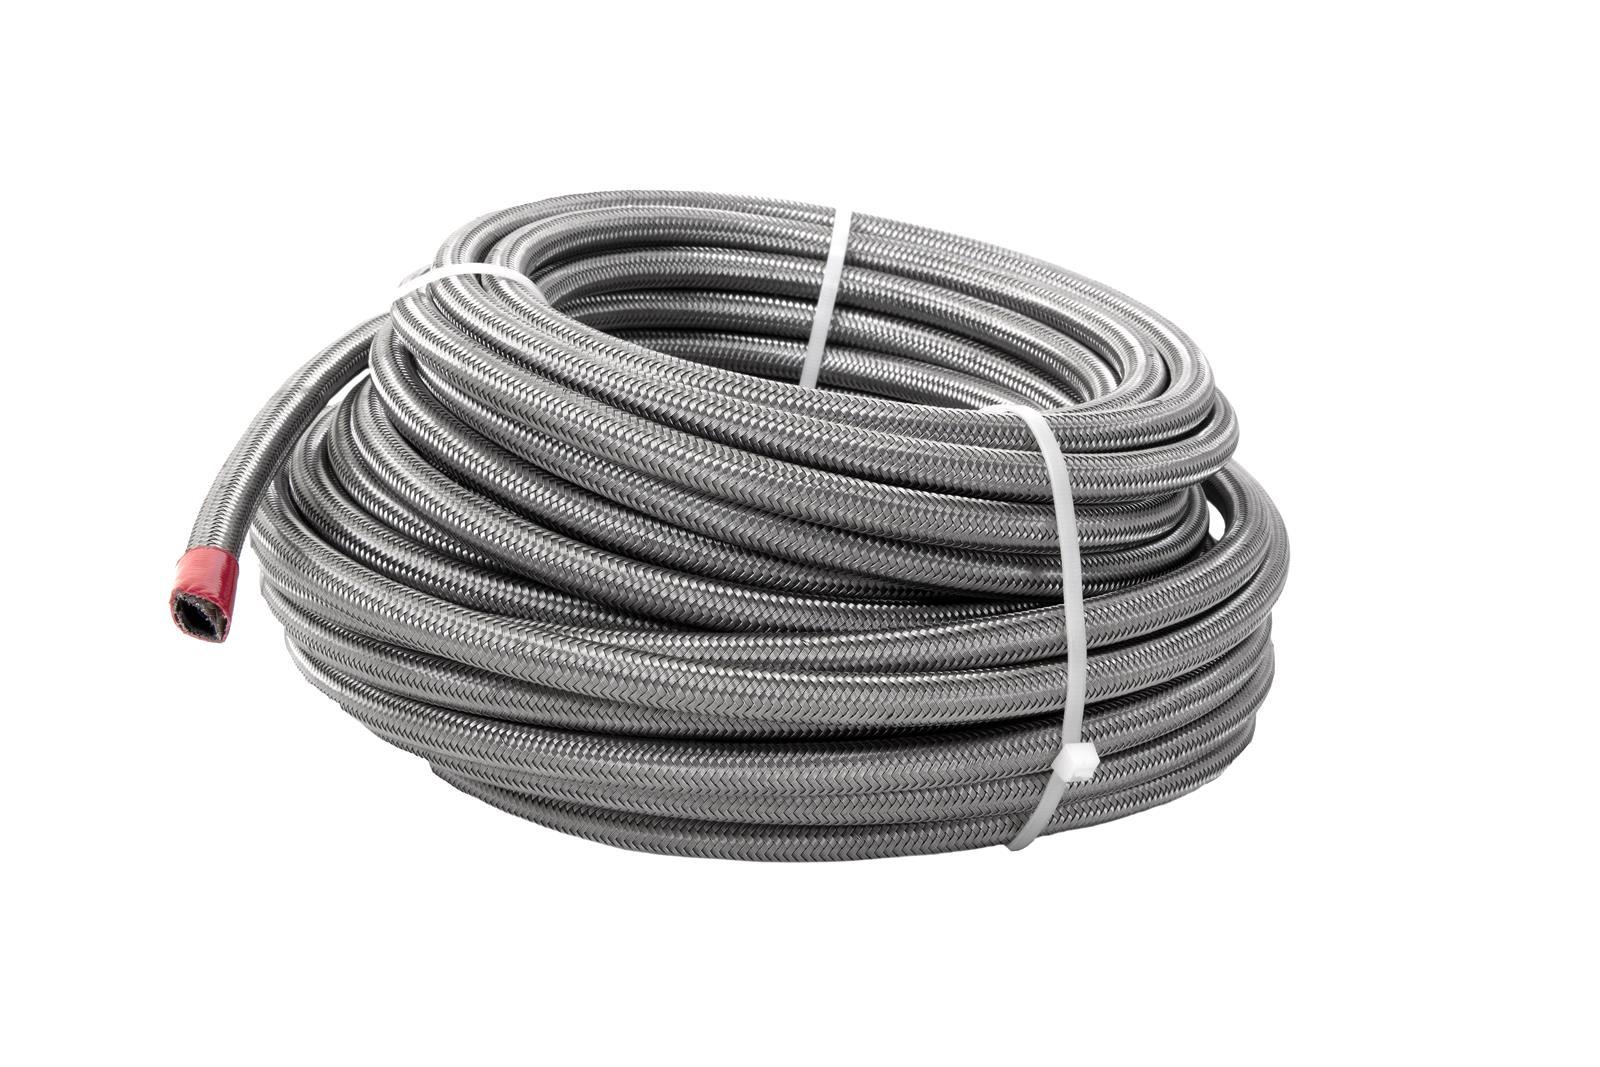 Aeromotive 15316 Hose, 6 AN, 20 ft, Braided Stainless / PTFE, Natural, Each